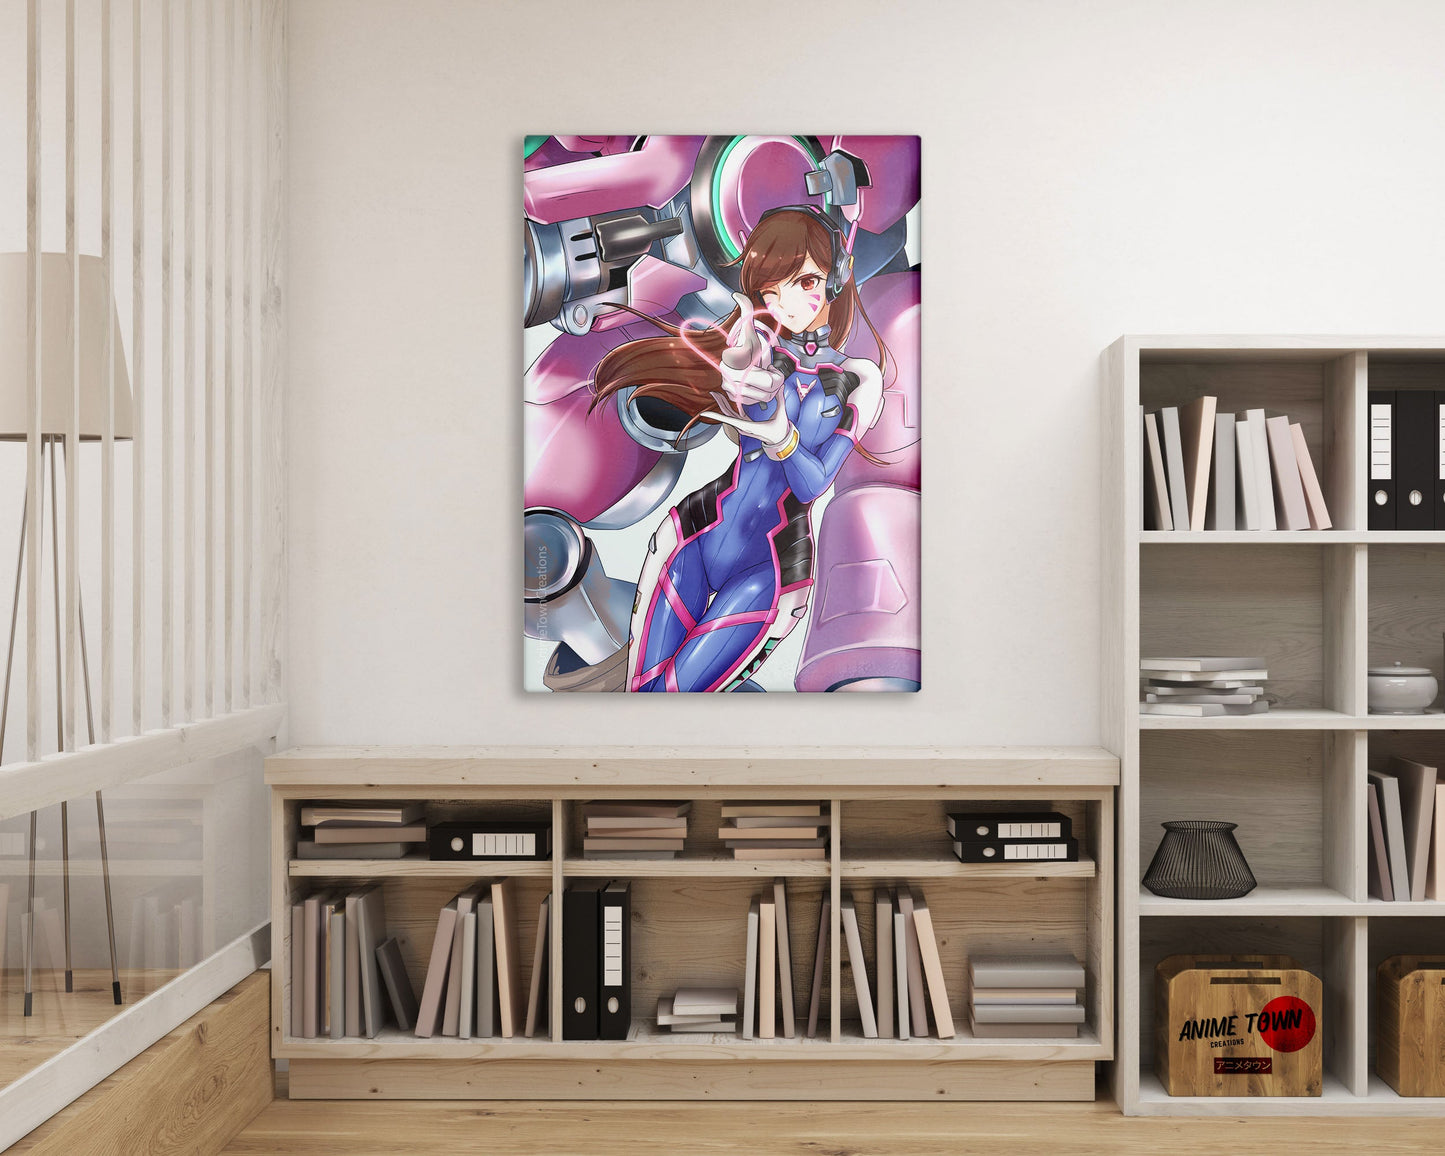 Anime Town Creations Metal Poster Overwatch D.Va 16" x 24" Home Goods - Anime Overwatch Metal Poster